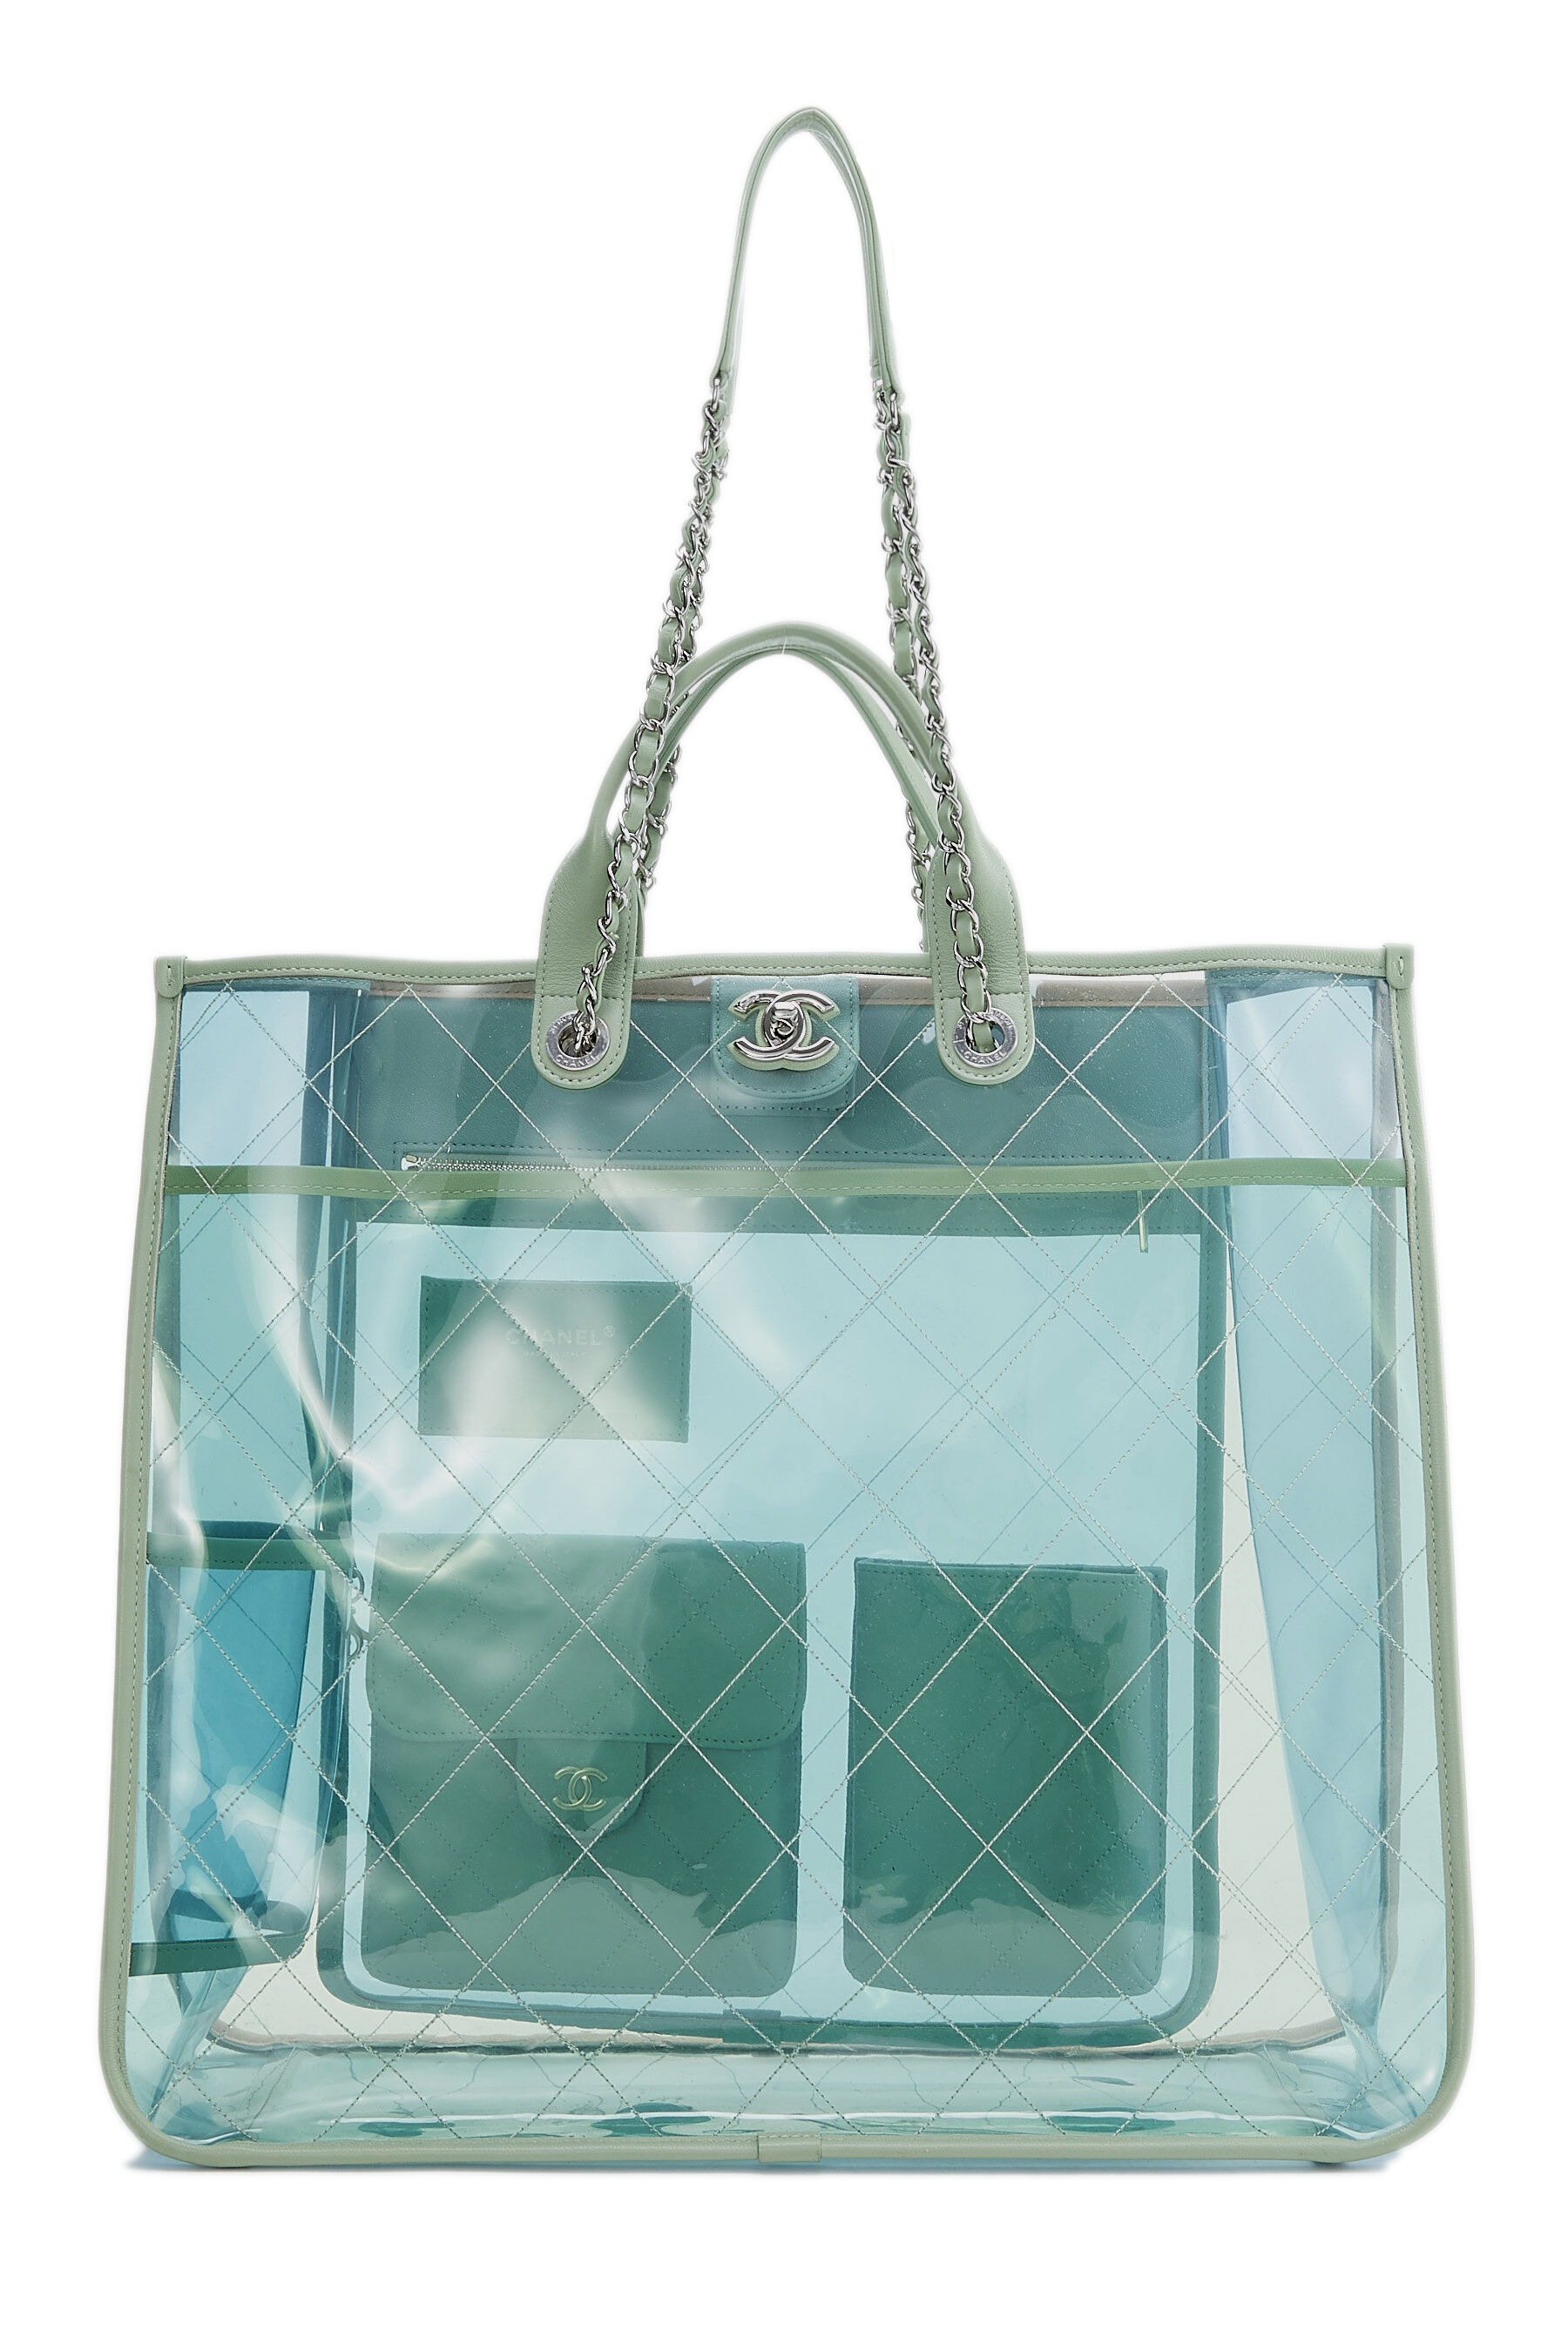 Clear Handbags are Trending and We Found Styles at All Price